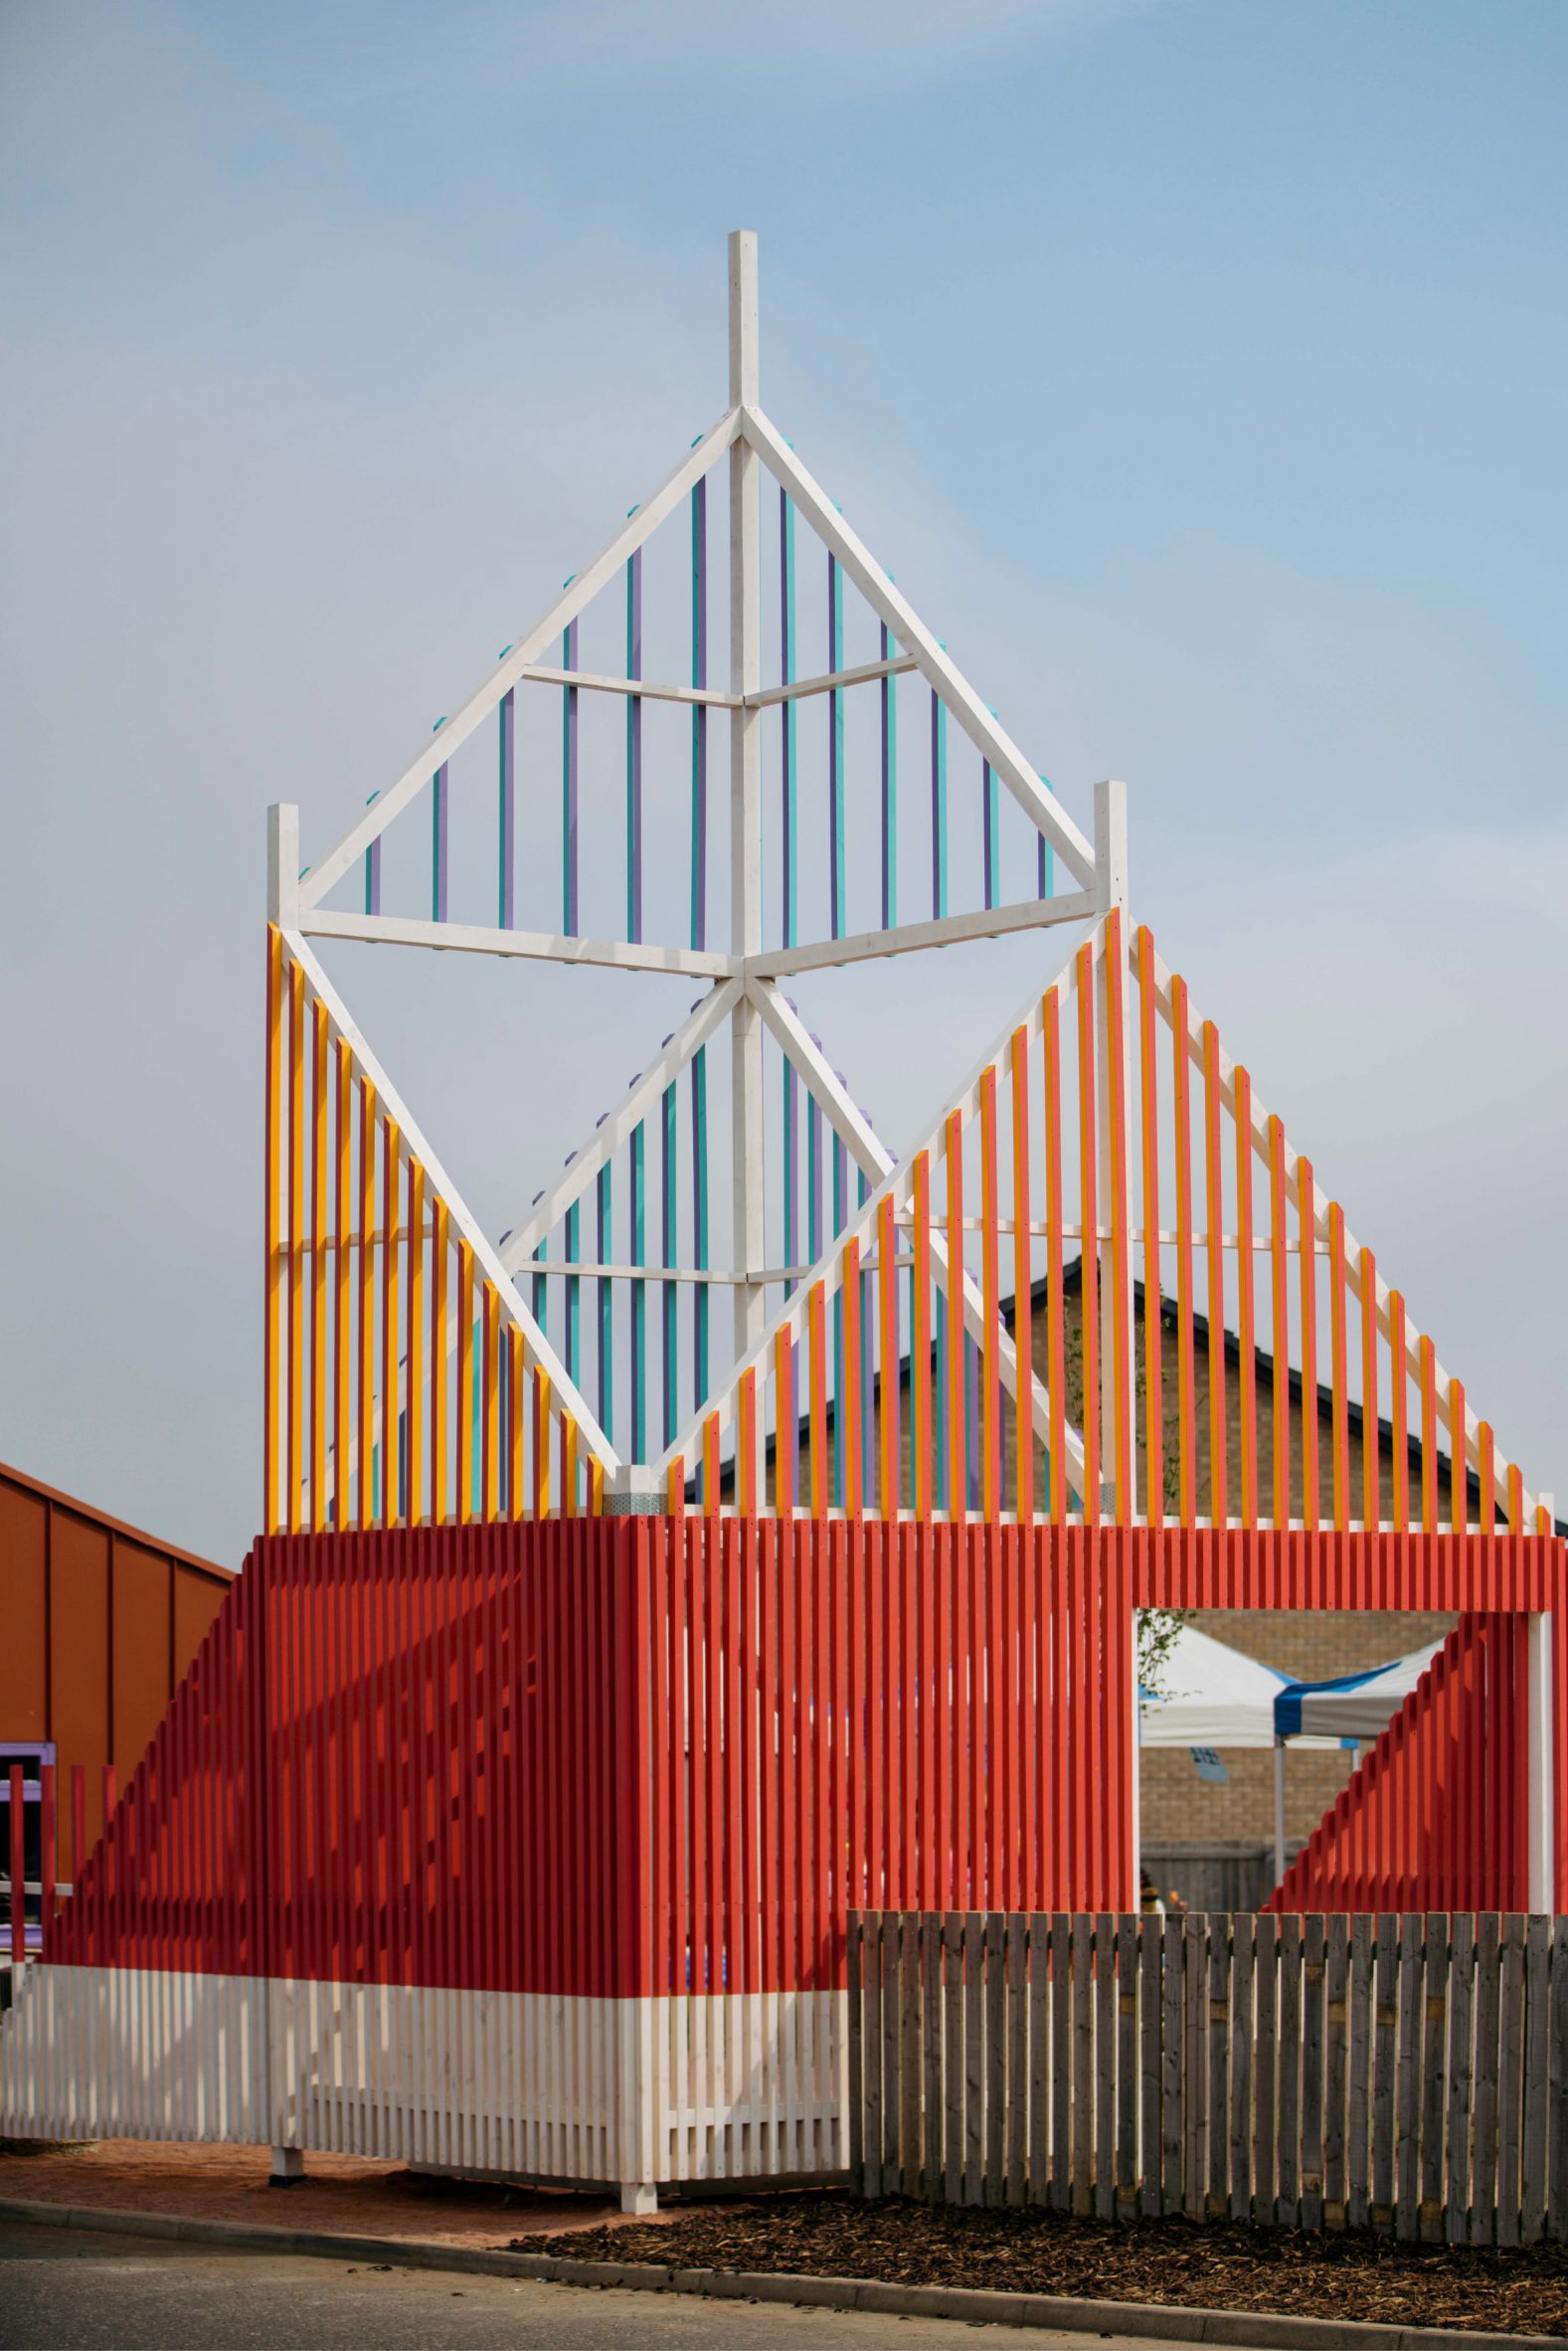 Colourful entrance structure made from timber battens